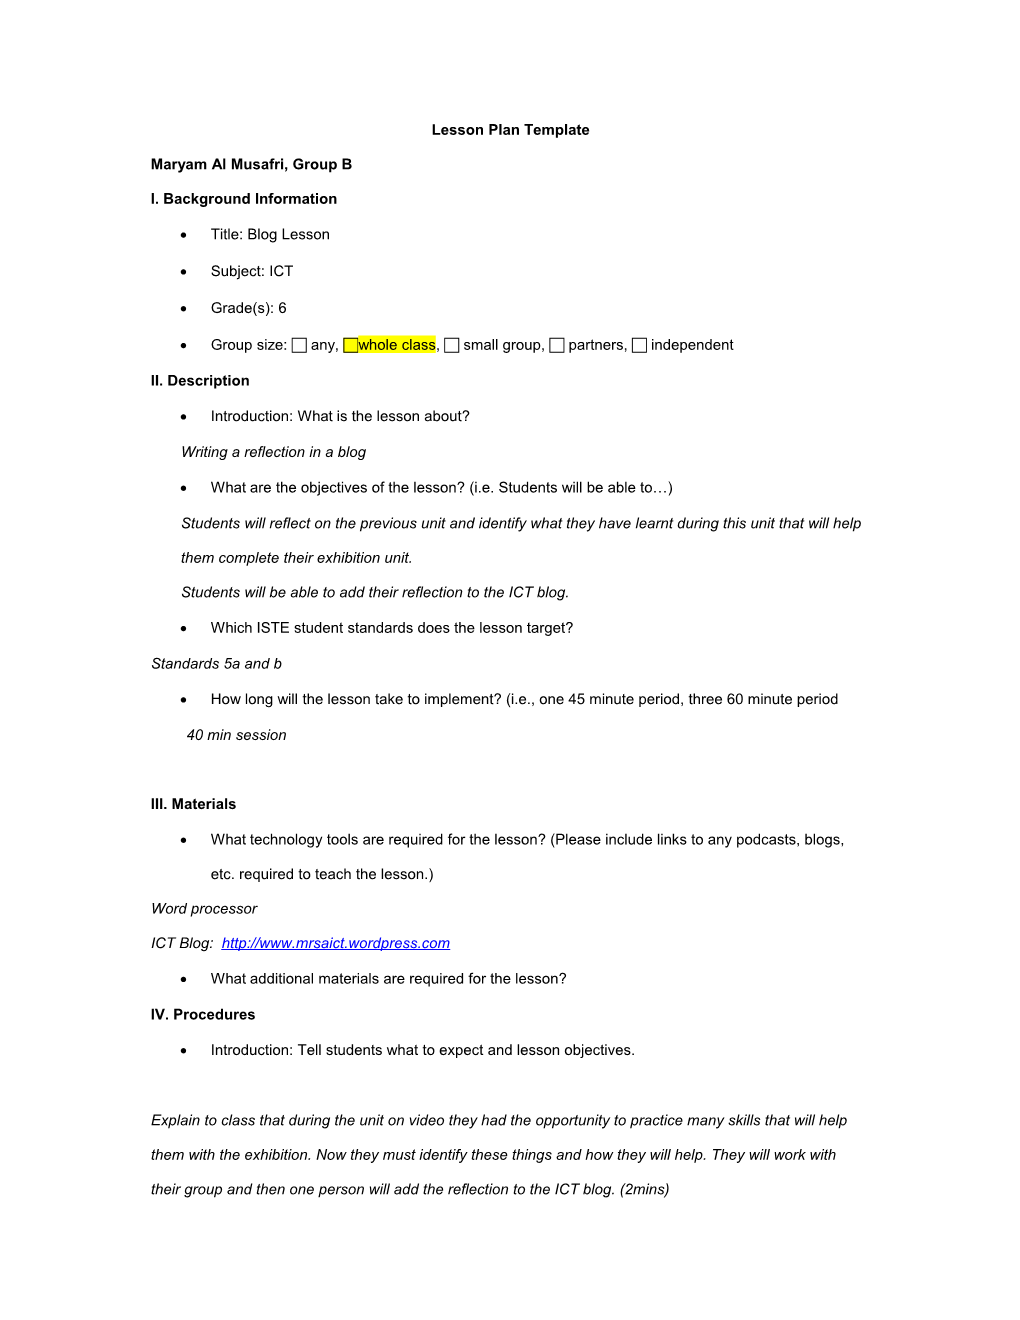 Lesson Plan Template s34